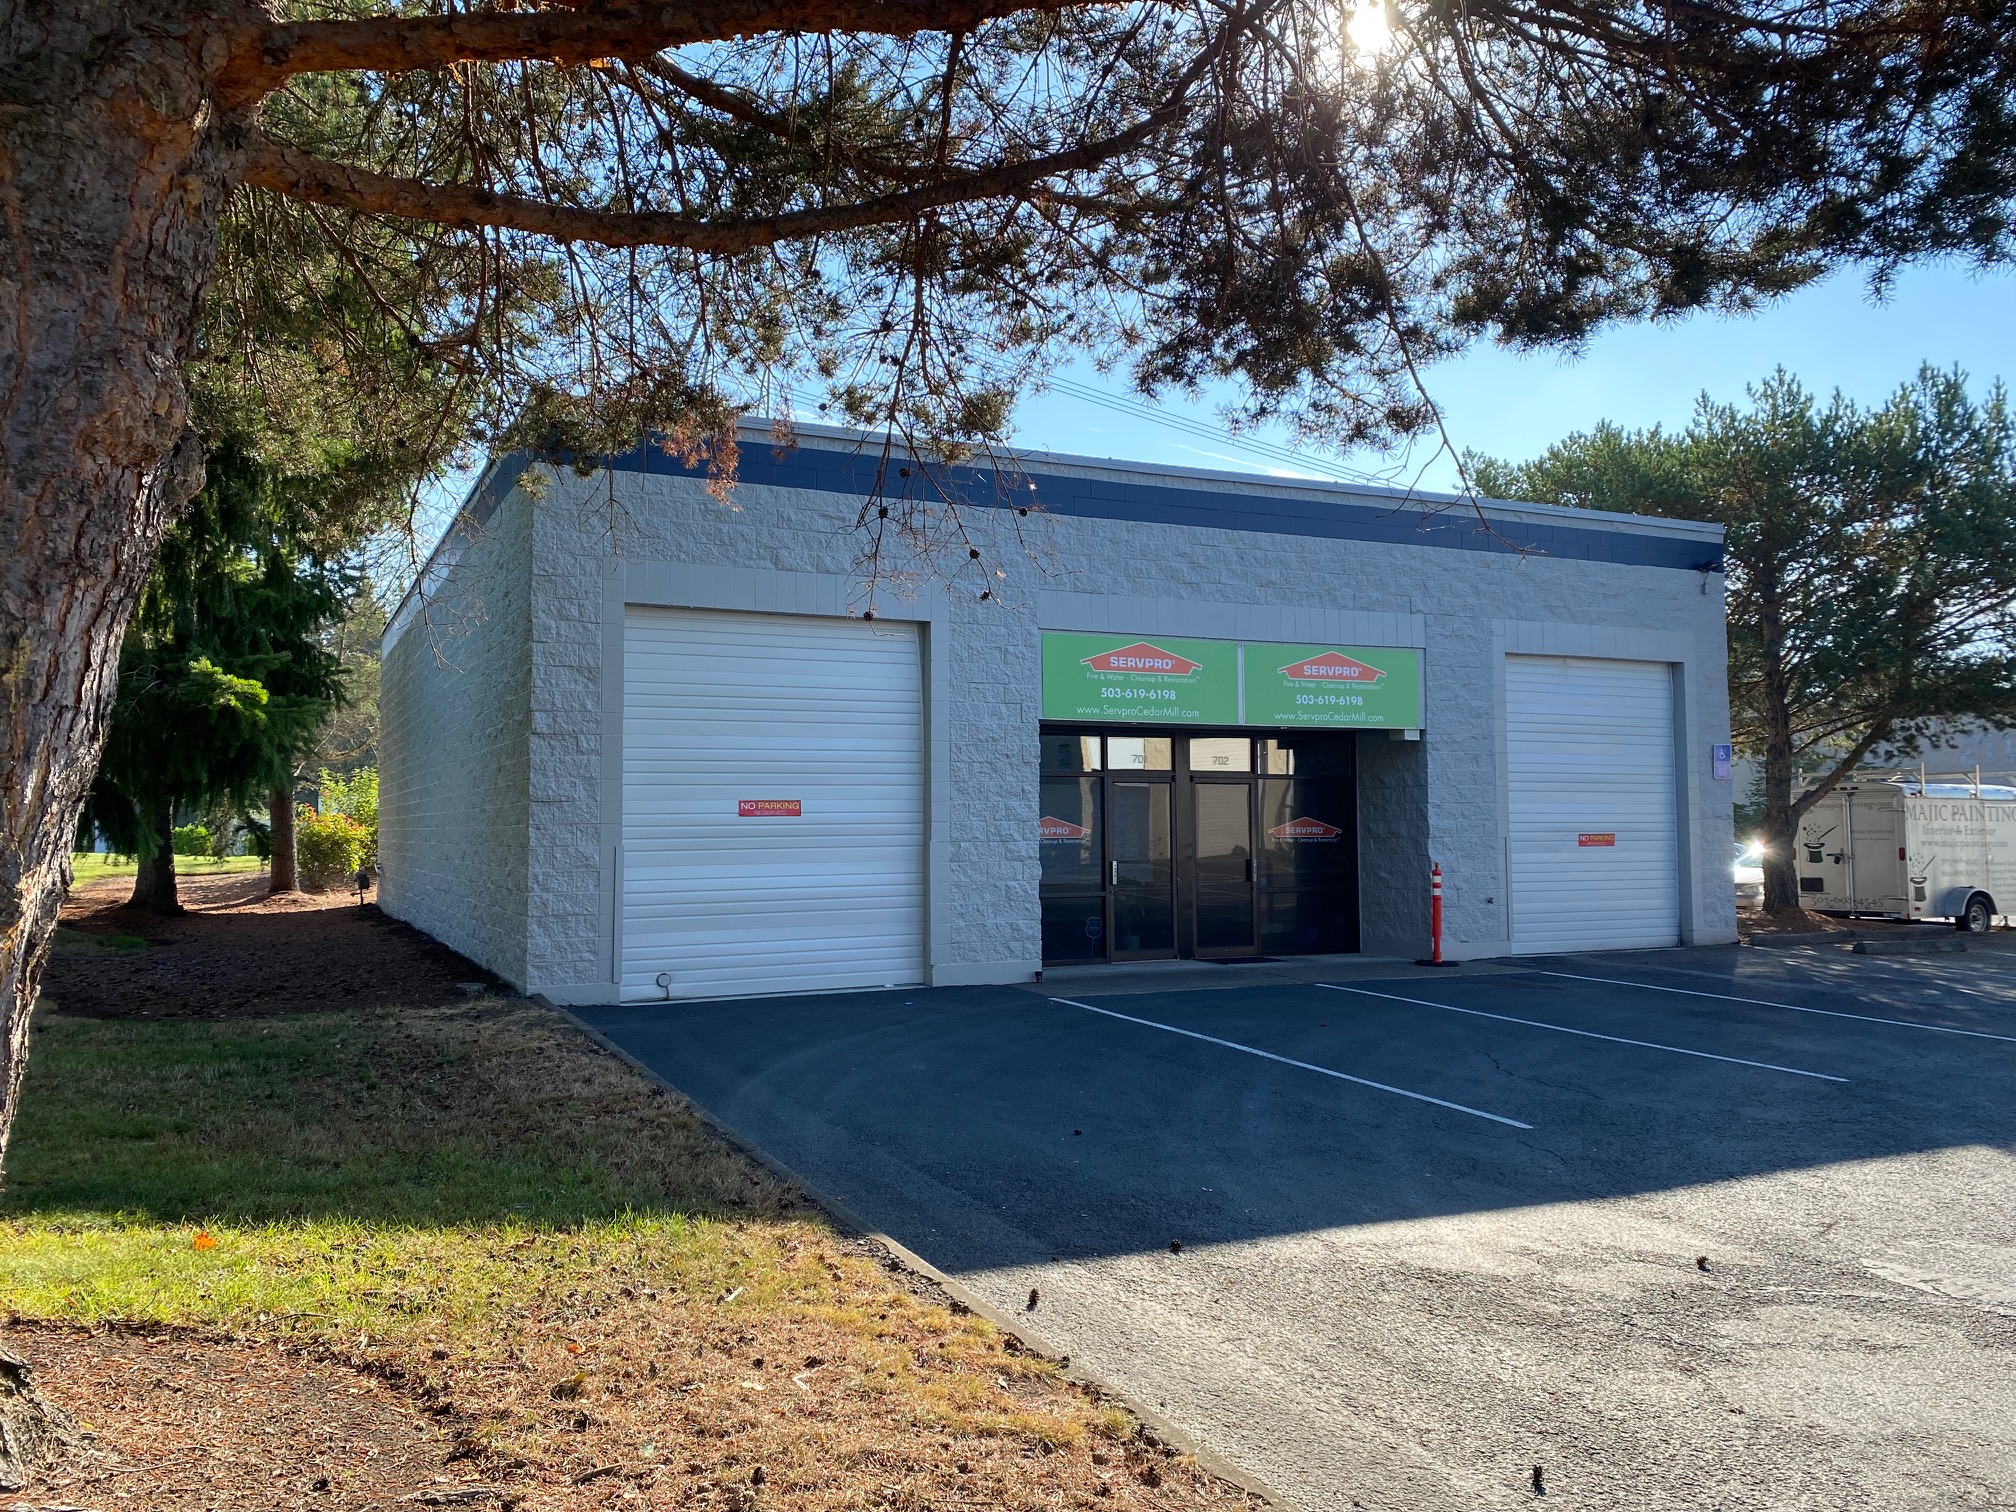 Another view of our building - located on the right side of the Cornelius Pass Business Park off Aloclek Drive in Hillsboro.